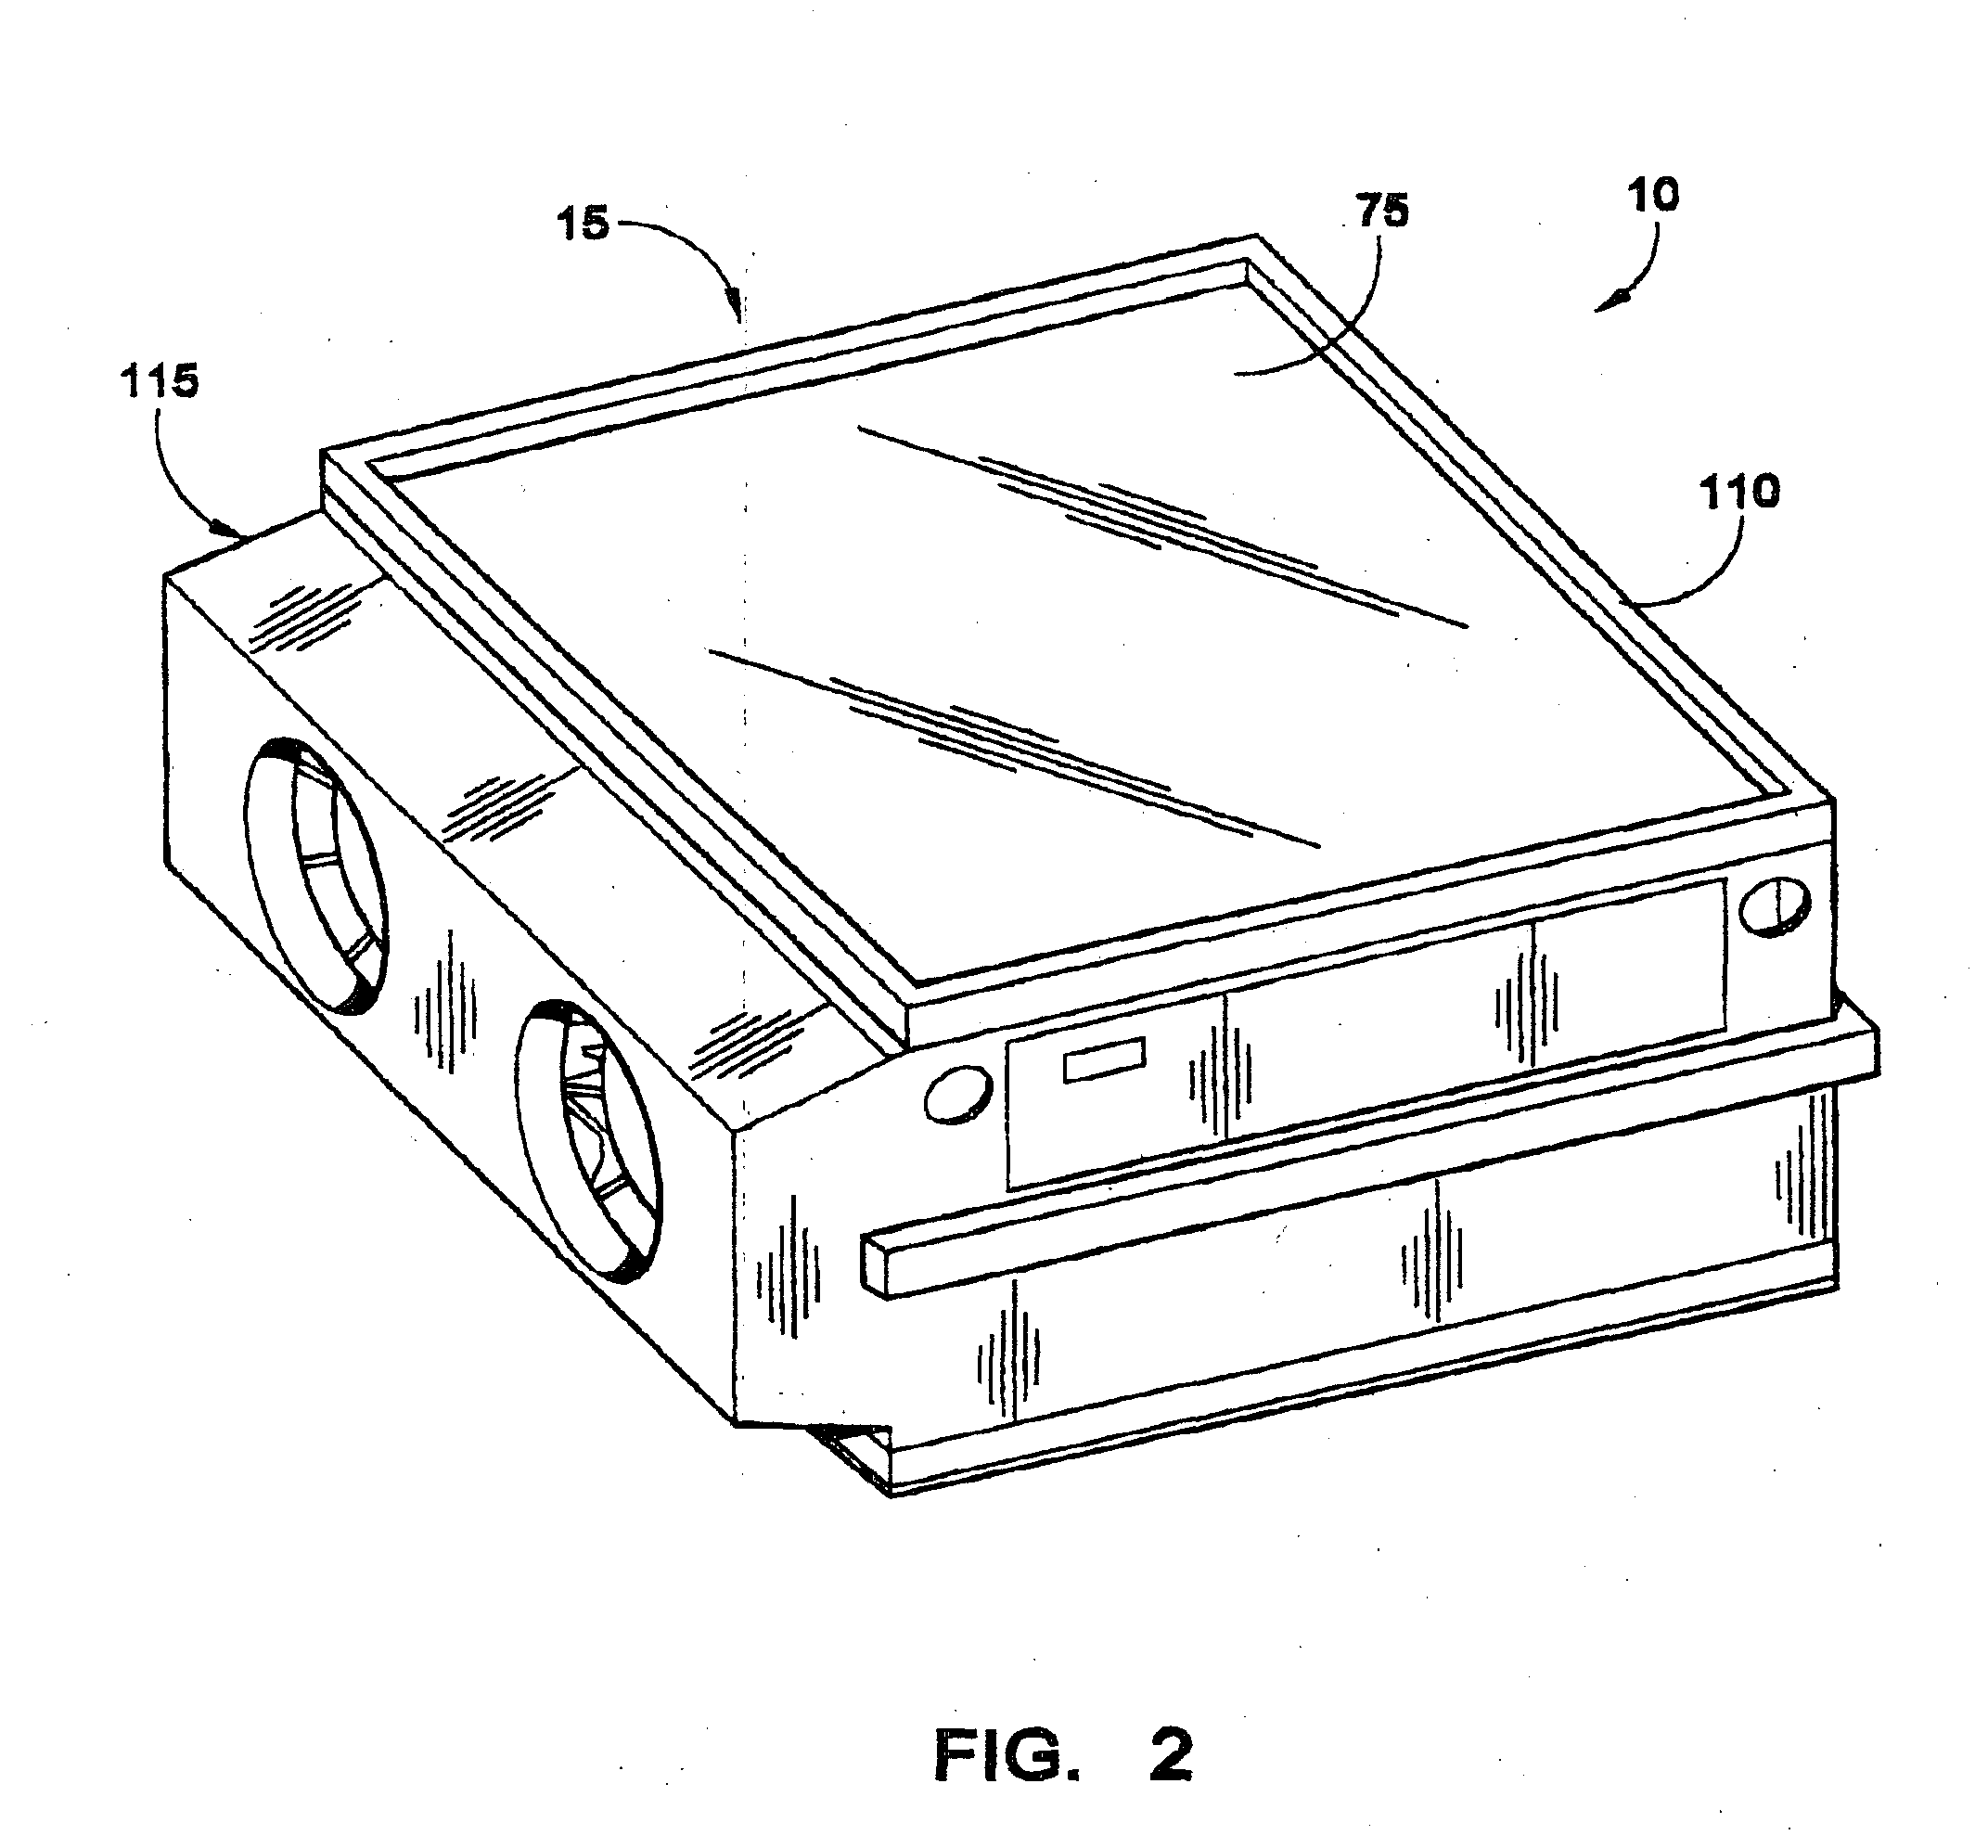 High-Power Ultracapacitor Energy Storage Pack and Method of Use